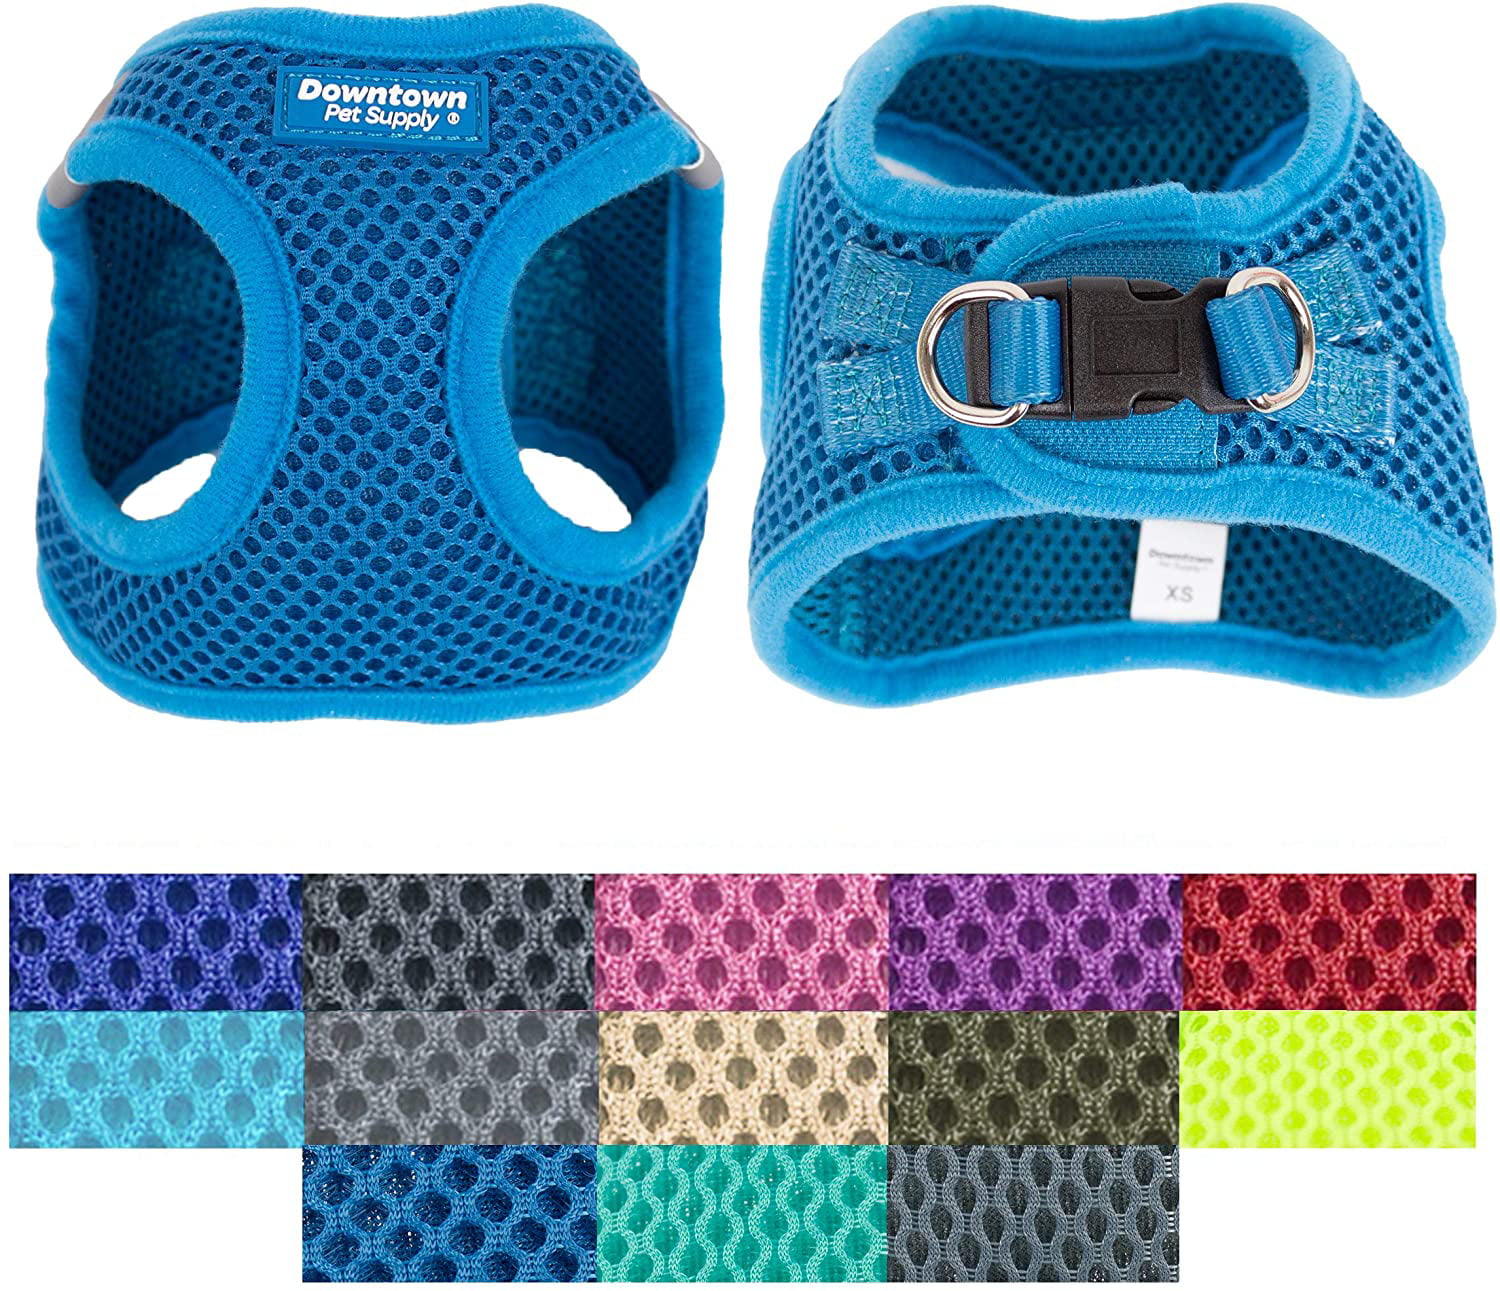 Downtown Pet Supply Best No Pull Purple, L Easy to Put on Small Step in Adjustable Dog Harness with Padded Vest Medium and Large Dogs